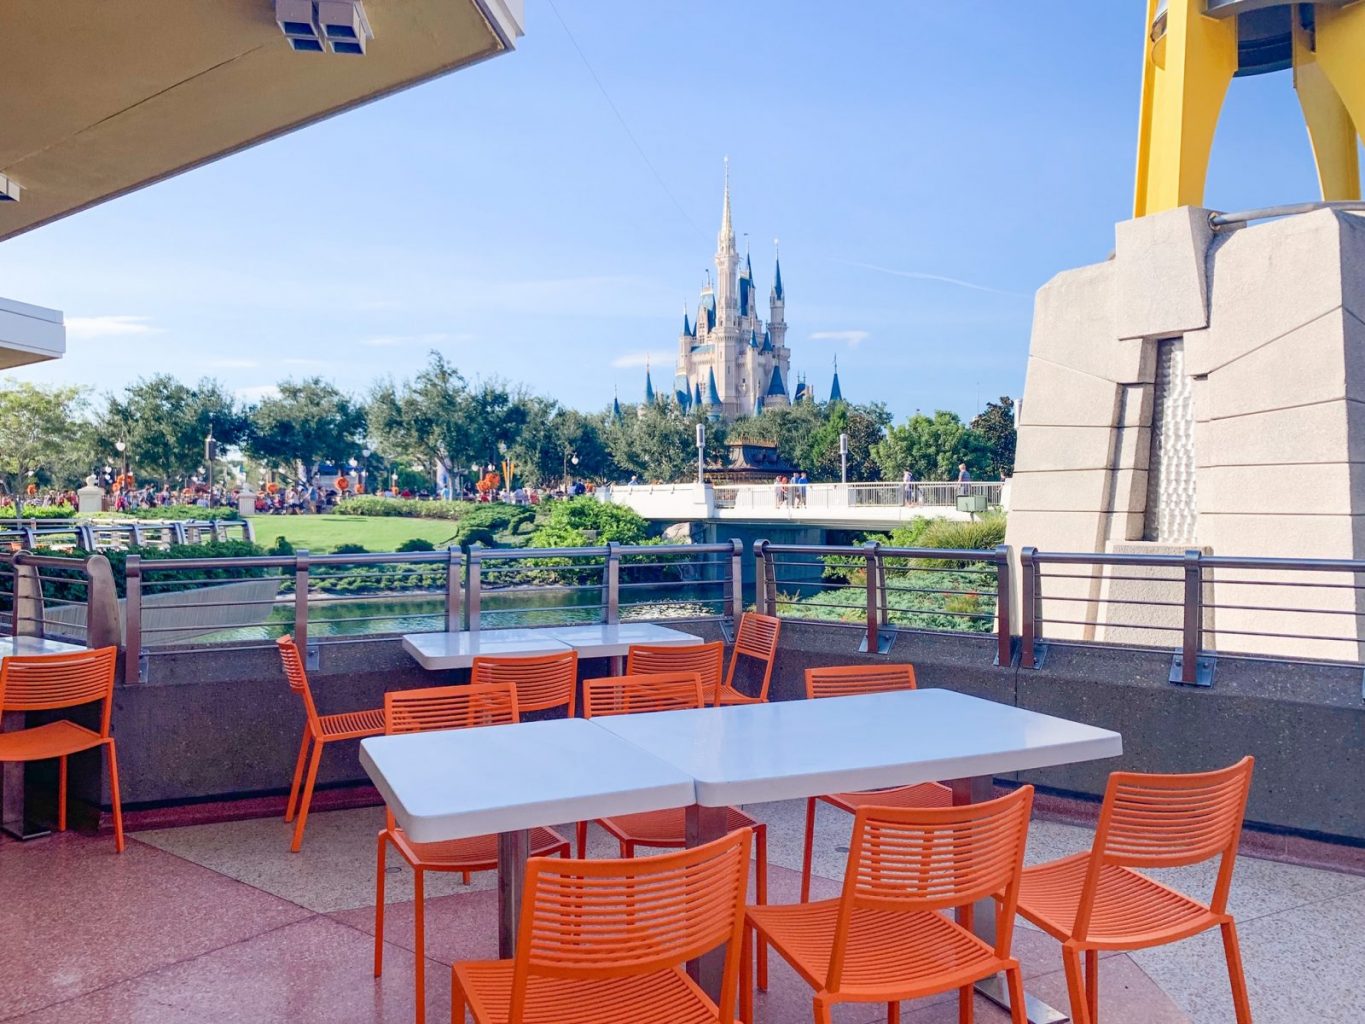 Enjoy your Dole Whip as part of a picnic outdoors at Magic Kingdom